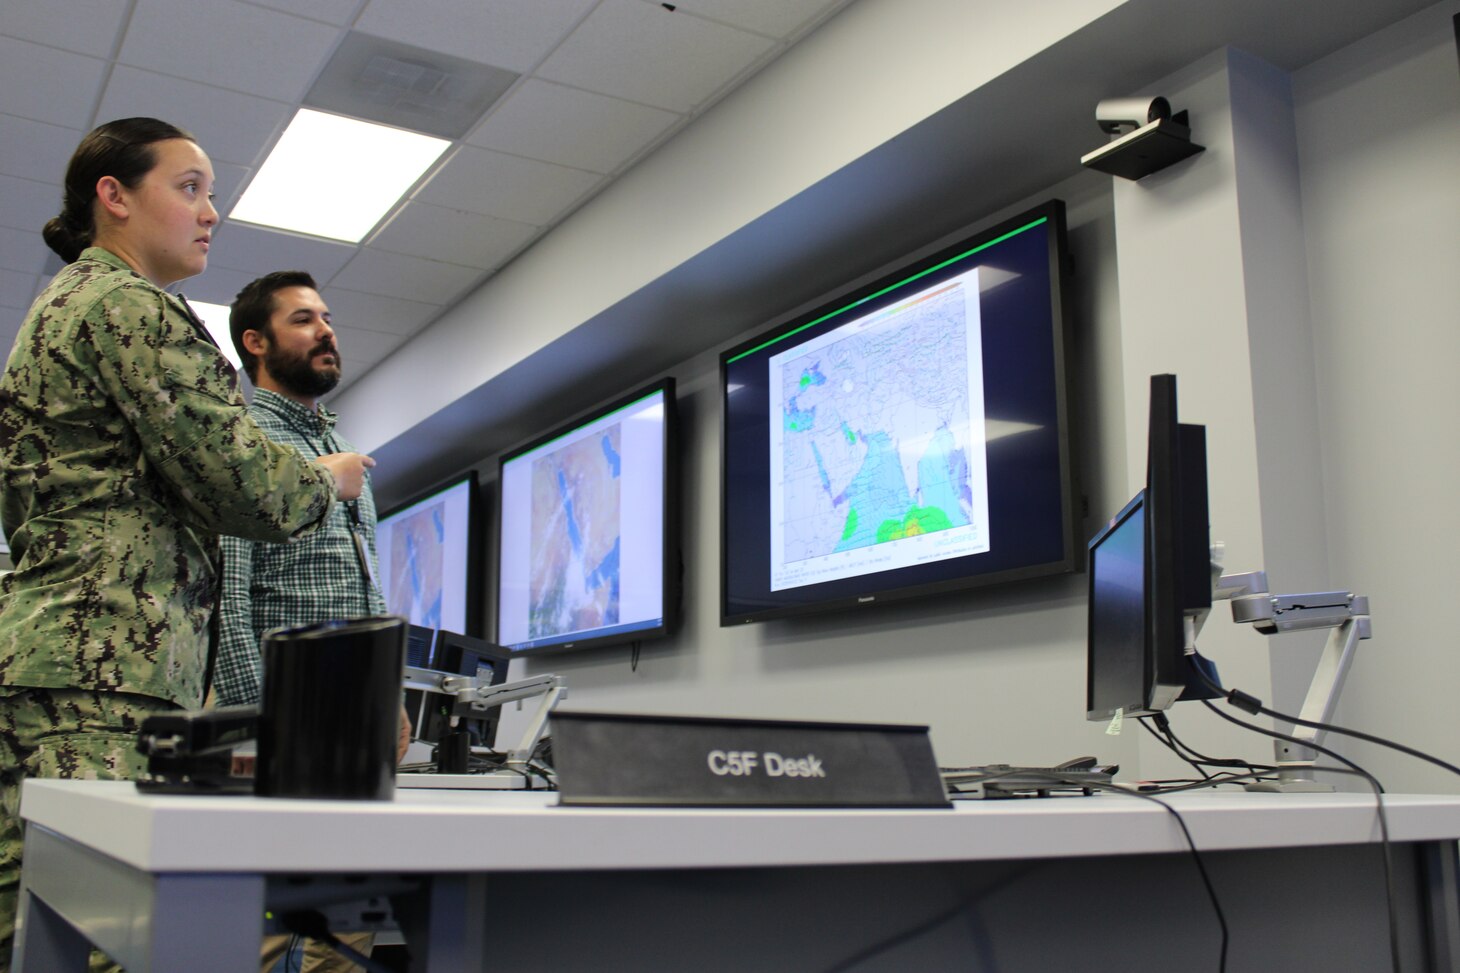 Civilian Michael Bourgeois, Naval Oceanography, CENTCOM 5th Fleet Representative and Meteorology and Oceanography Officer LTJG Keely V. Martin, 5th Fleet Desk at Naval Oceanography’s Maritime Operations Center, discuss the 5th Fleet AOR while observing topographic images of its geographical area. 

Recently, the U.S. Naval Meteorology and Oceanography Command (Naval Oceanography) proved mission-essential in the first U.S.-led evacuation of hundreds of American citizens from the, currently war-torn, country of Sudan.

Naval Oceanography provided critical forecasts and surveys of ports, harbors and coastal areas navigated by U.S. Navy ships during [non-combative] evacuation procedures from a port city in Sudan.